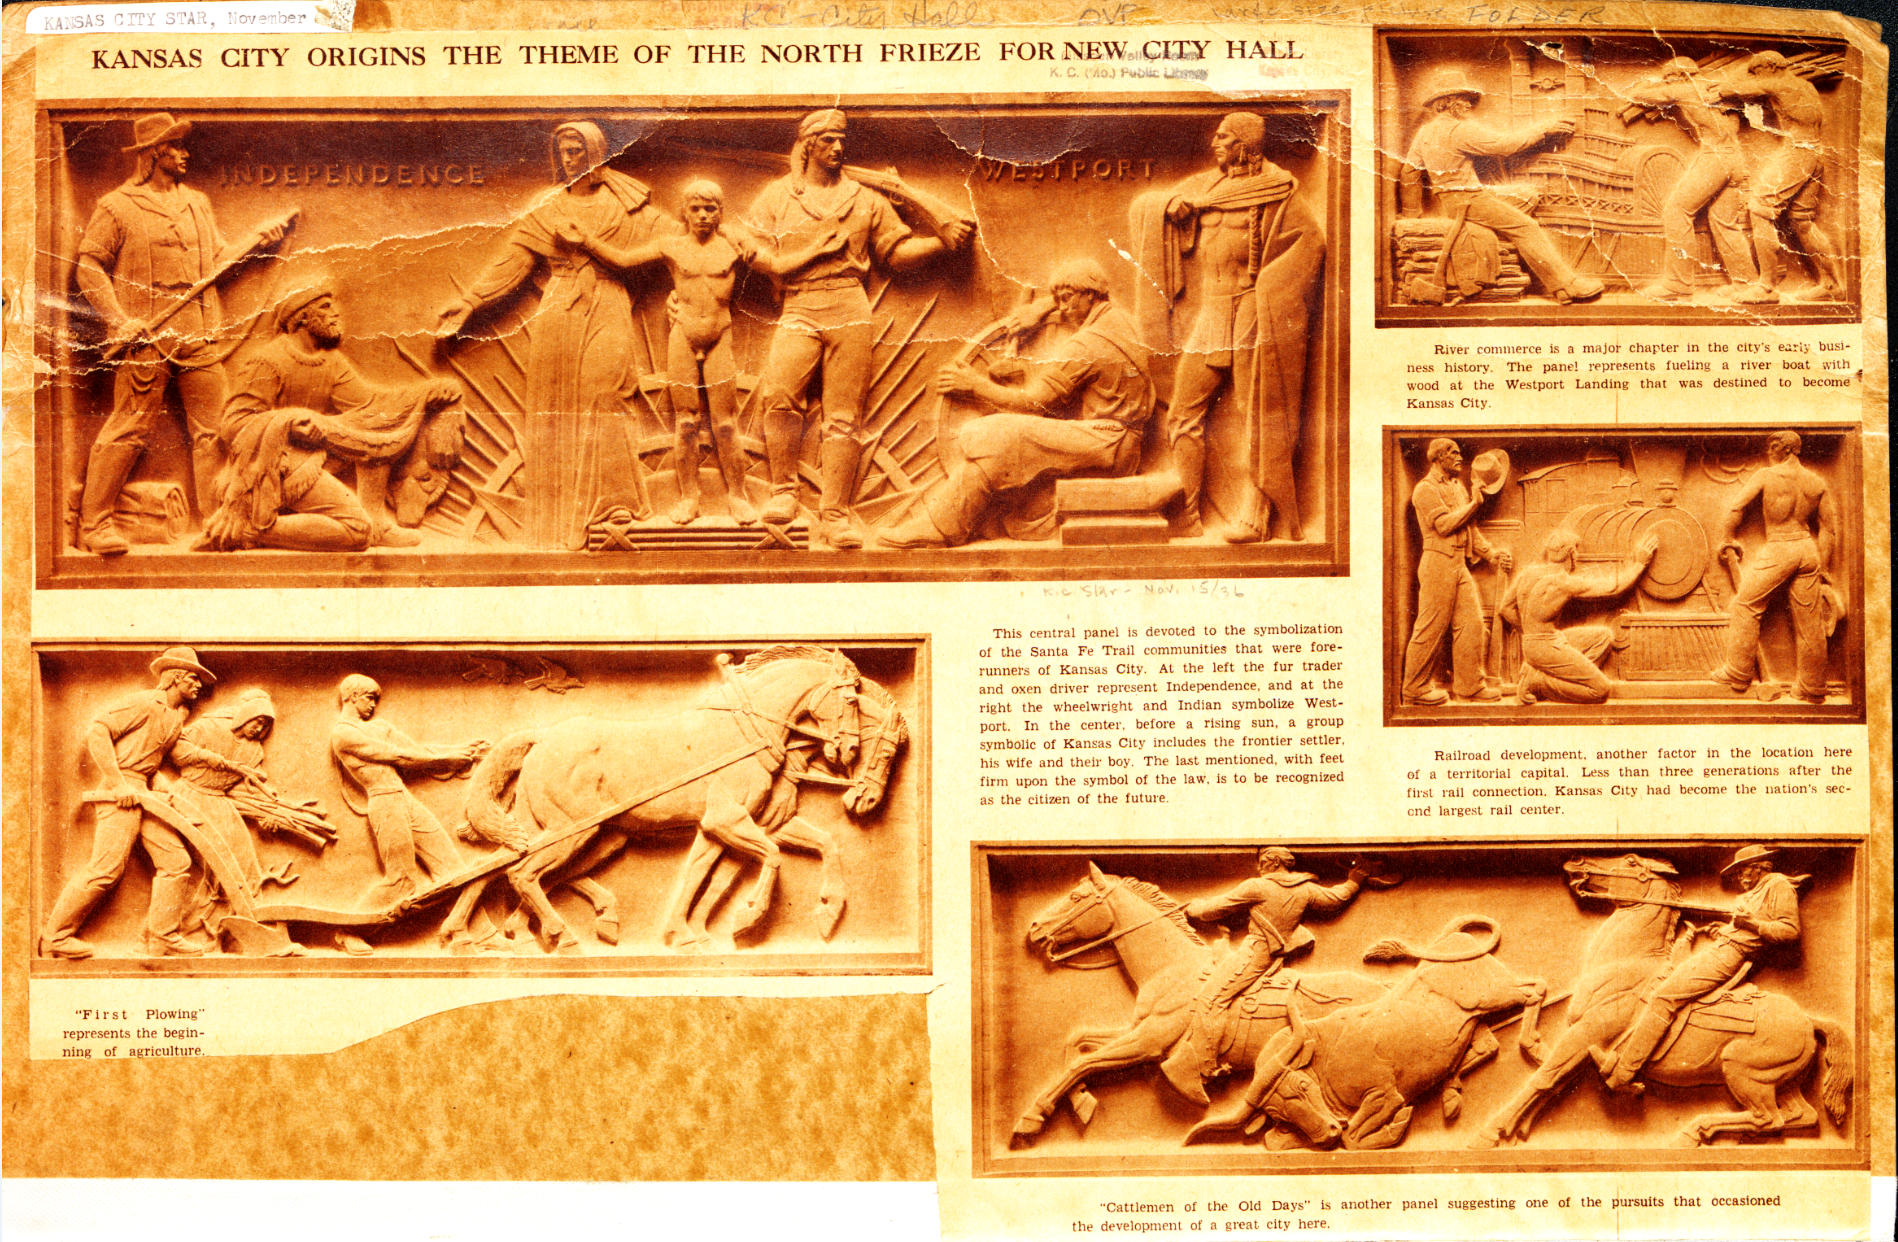 An image of the Kansas City Star article that details the friezes on the North face of City Hall.